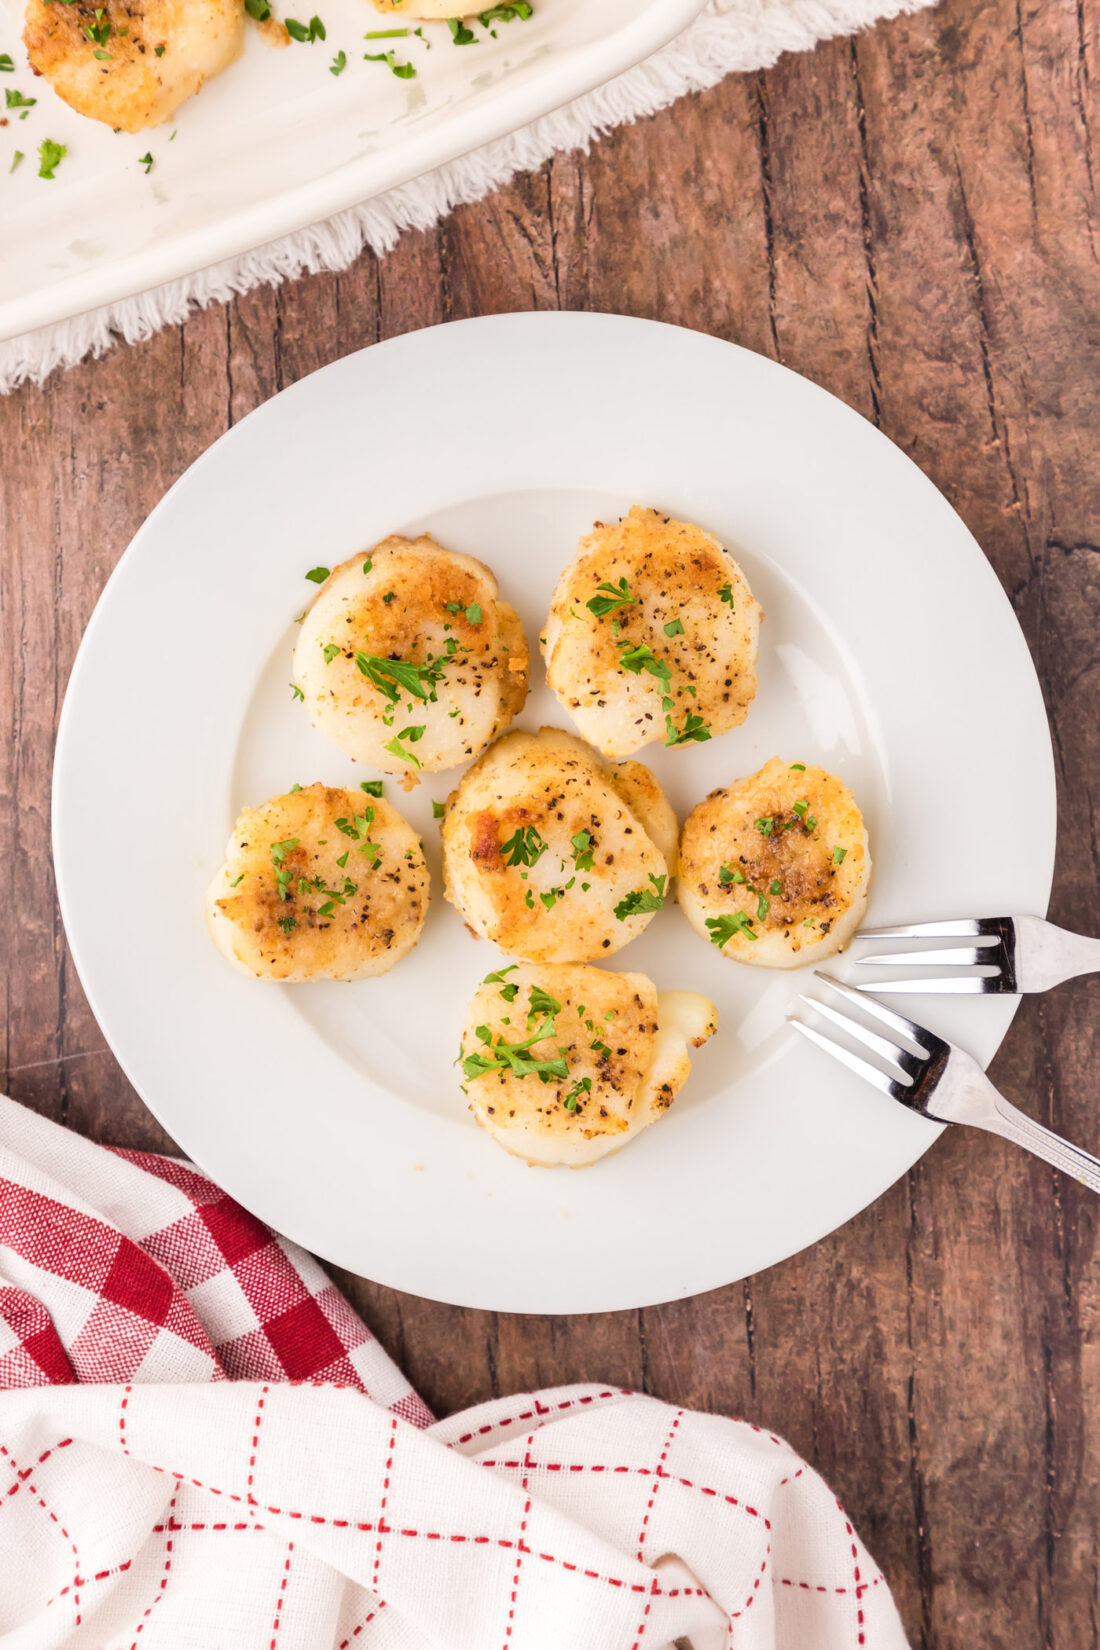 Plate of Baked Scallops